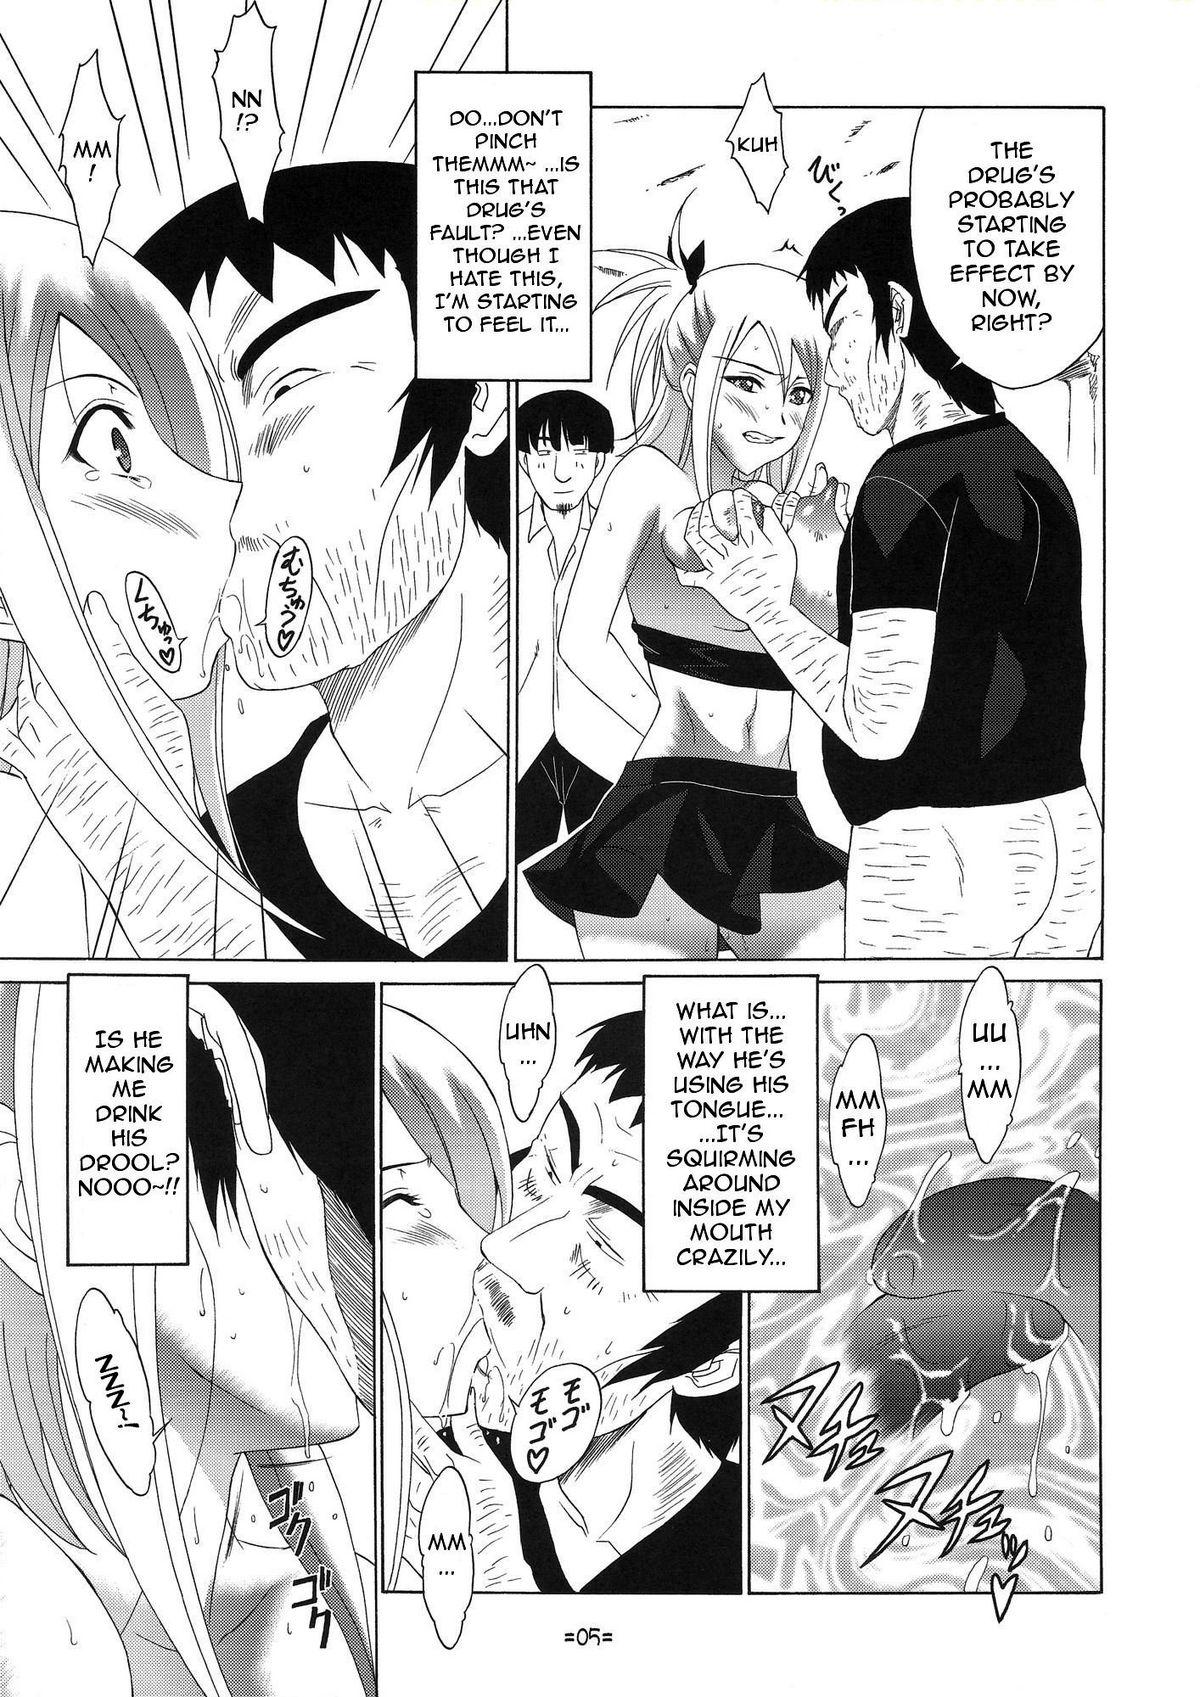 Playing FAIRY SLAVE II - Fairy tail Ass Worship - Page 6